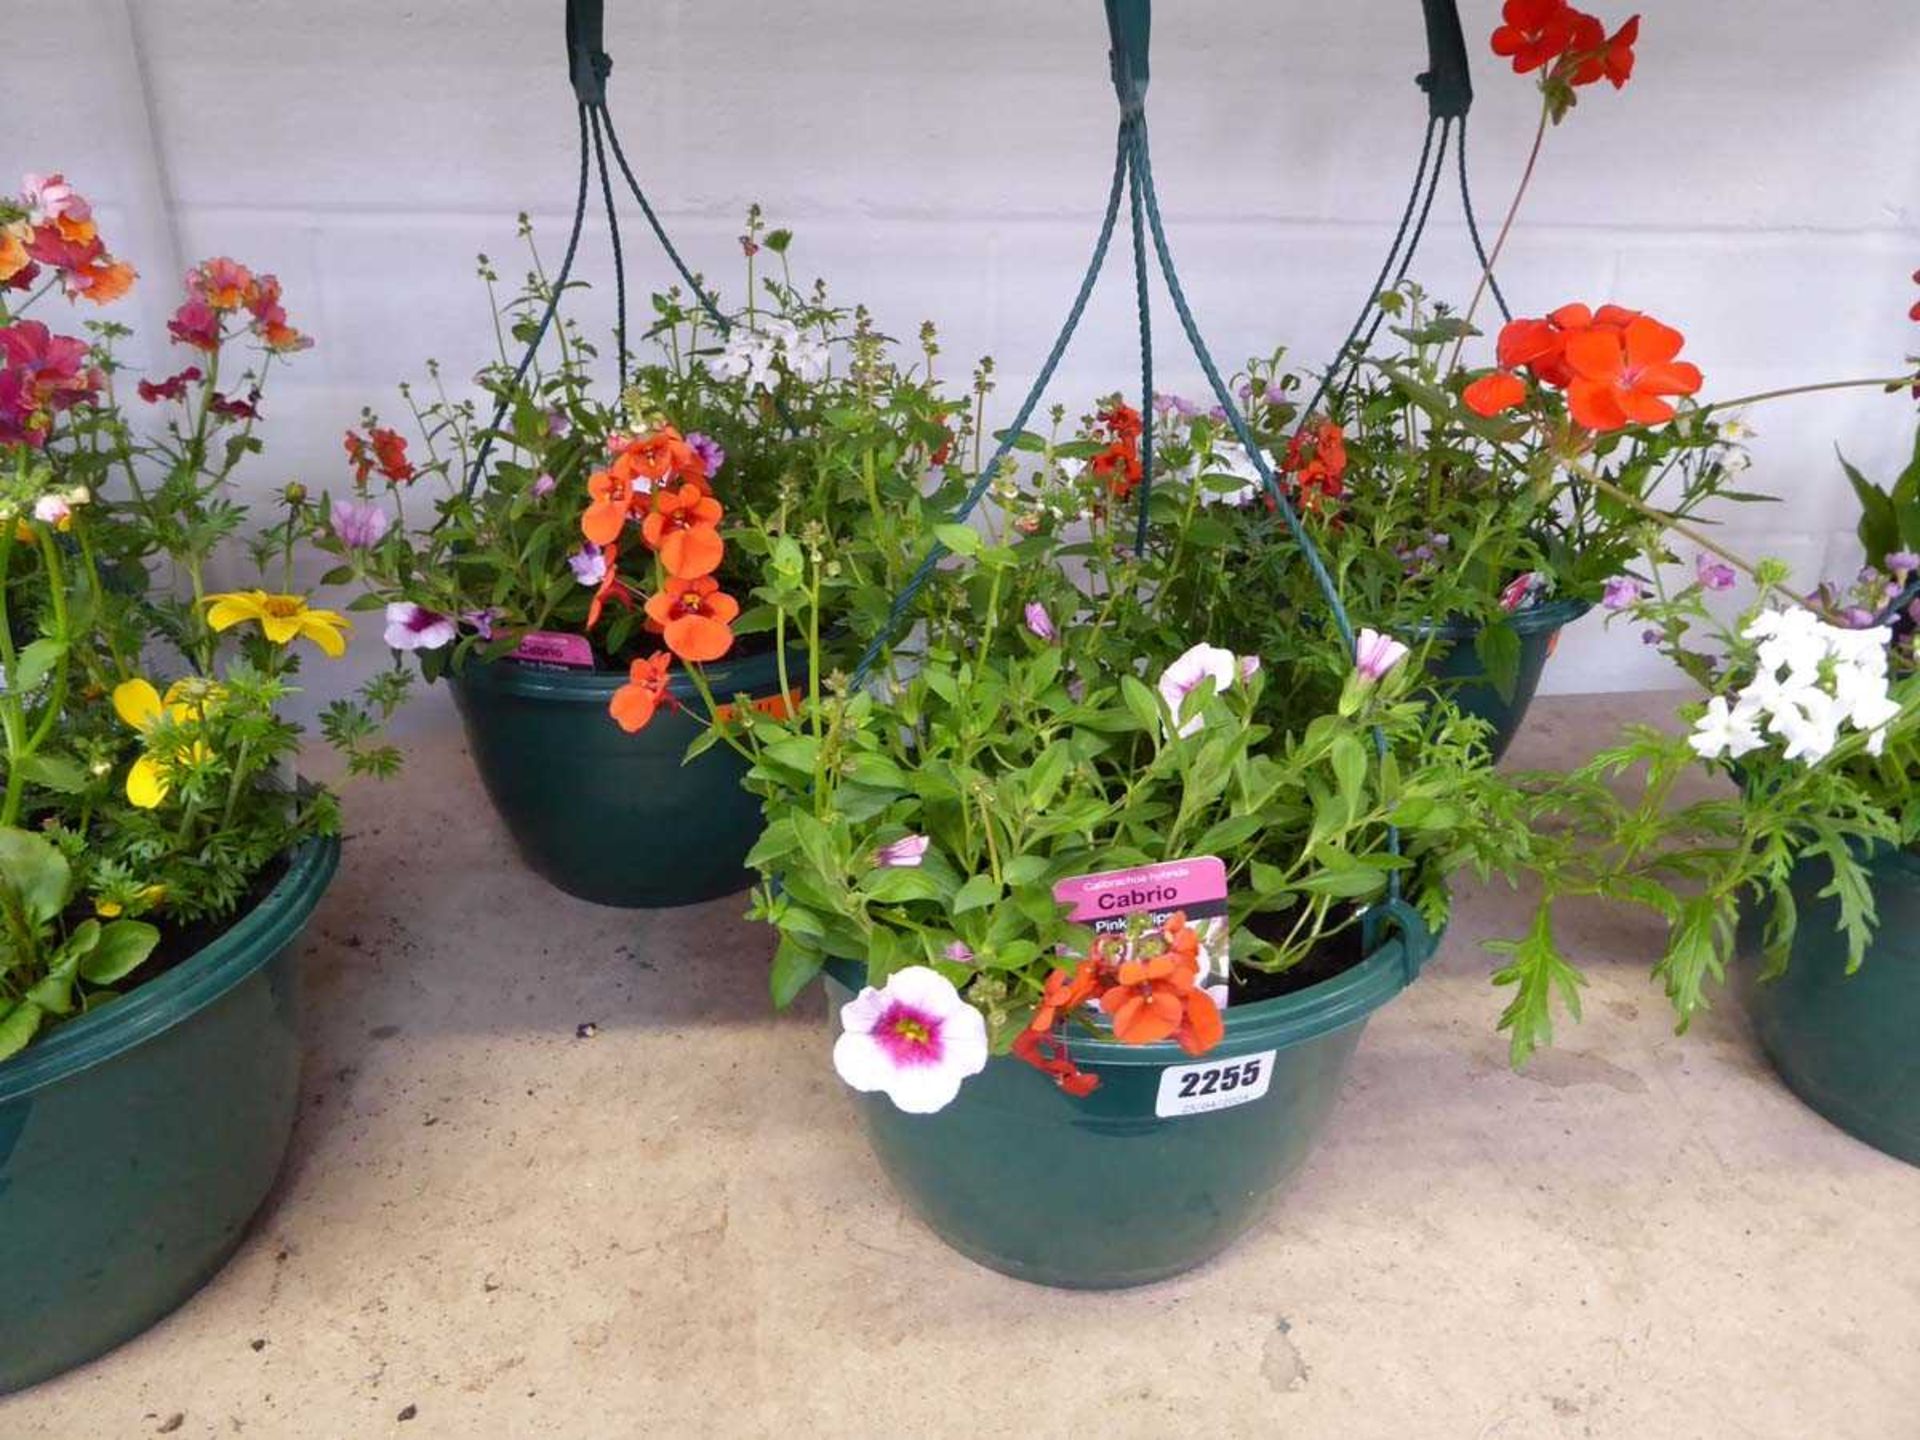 Pair of pre-planted hanging baskets containing mixed plants